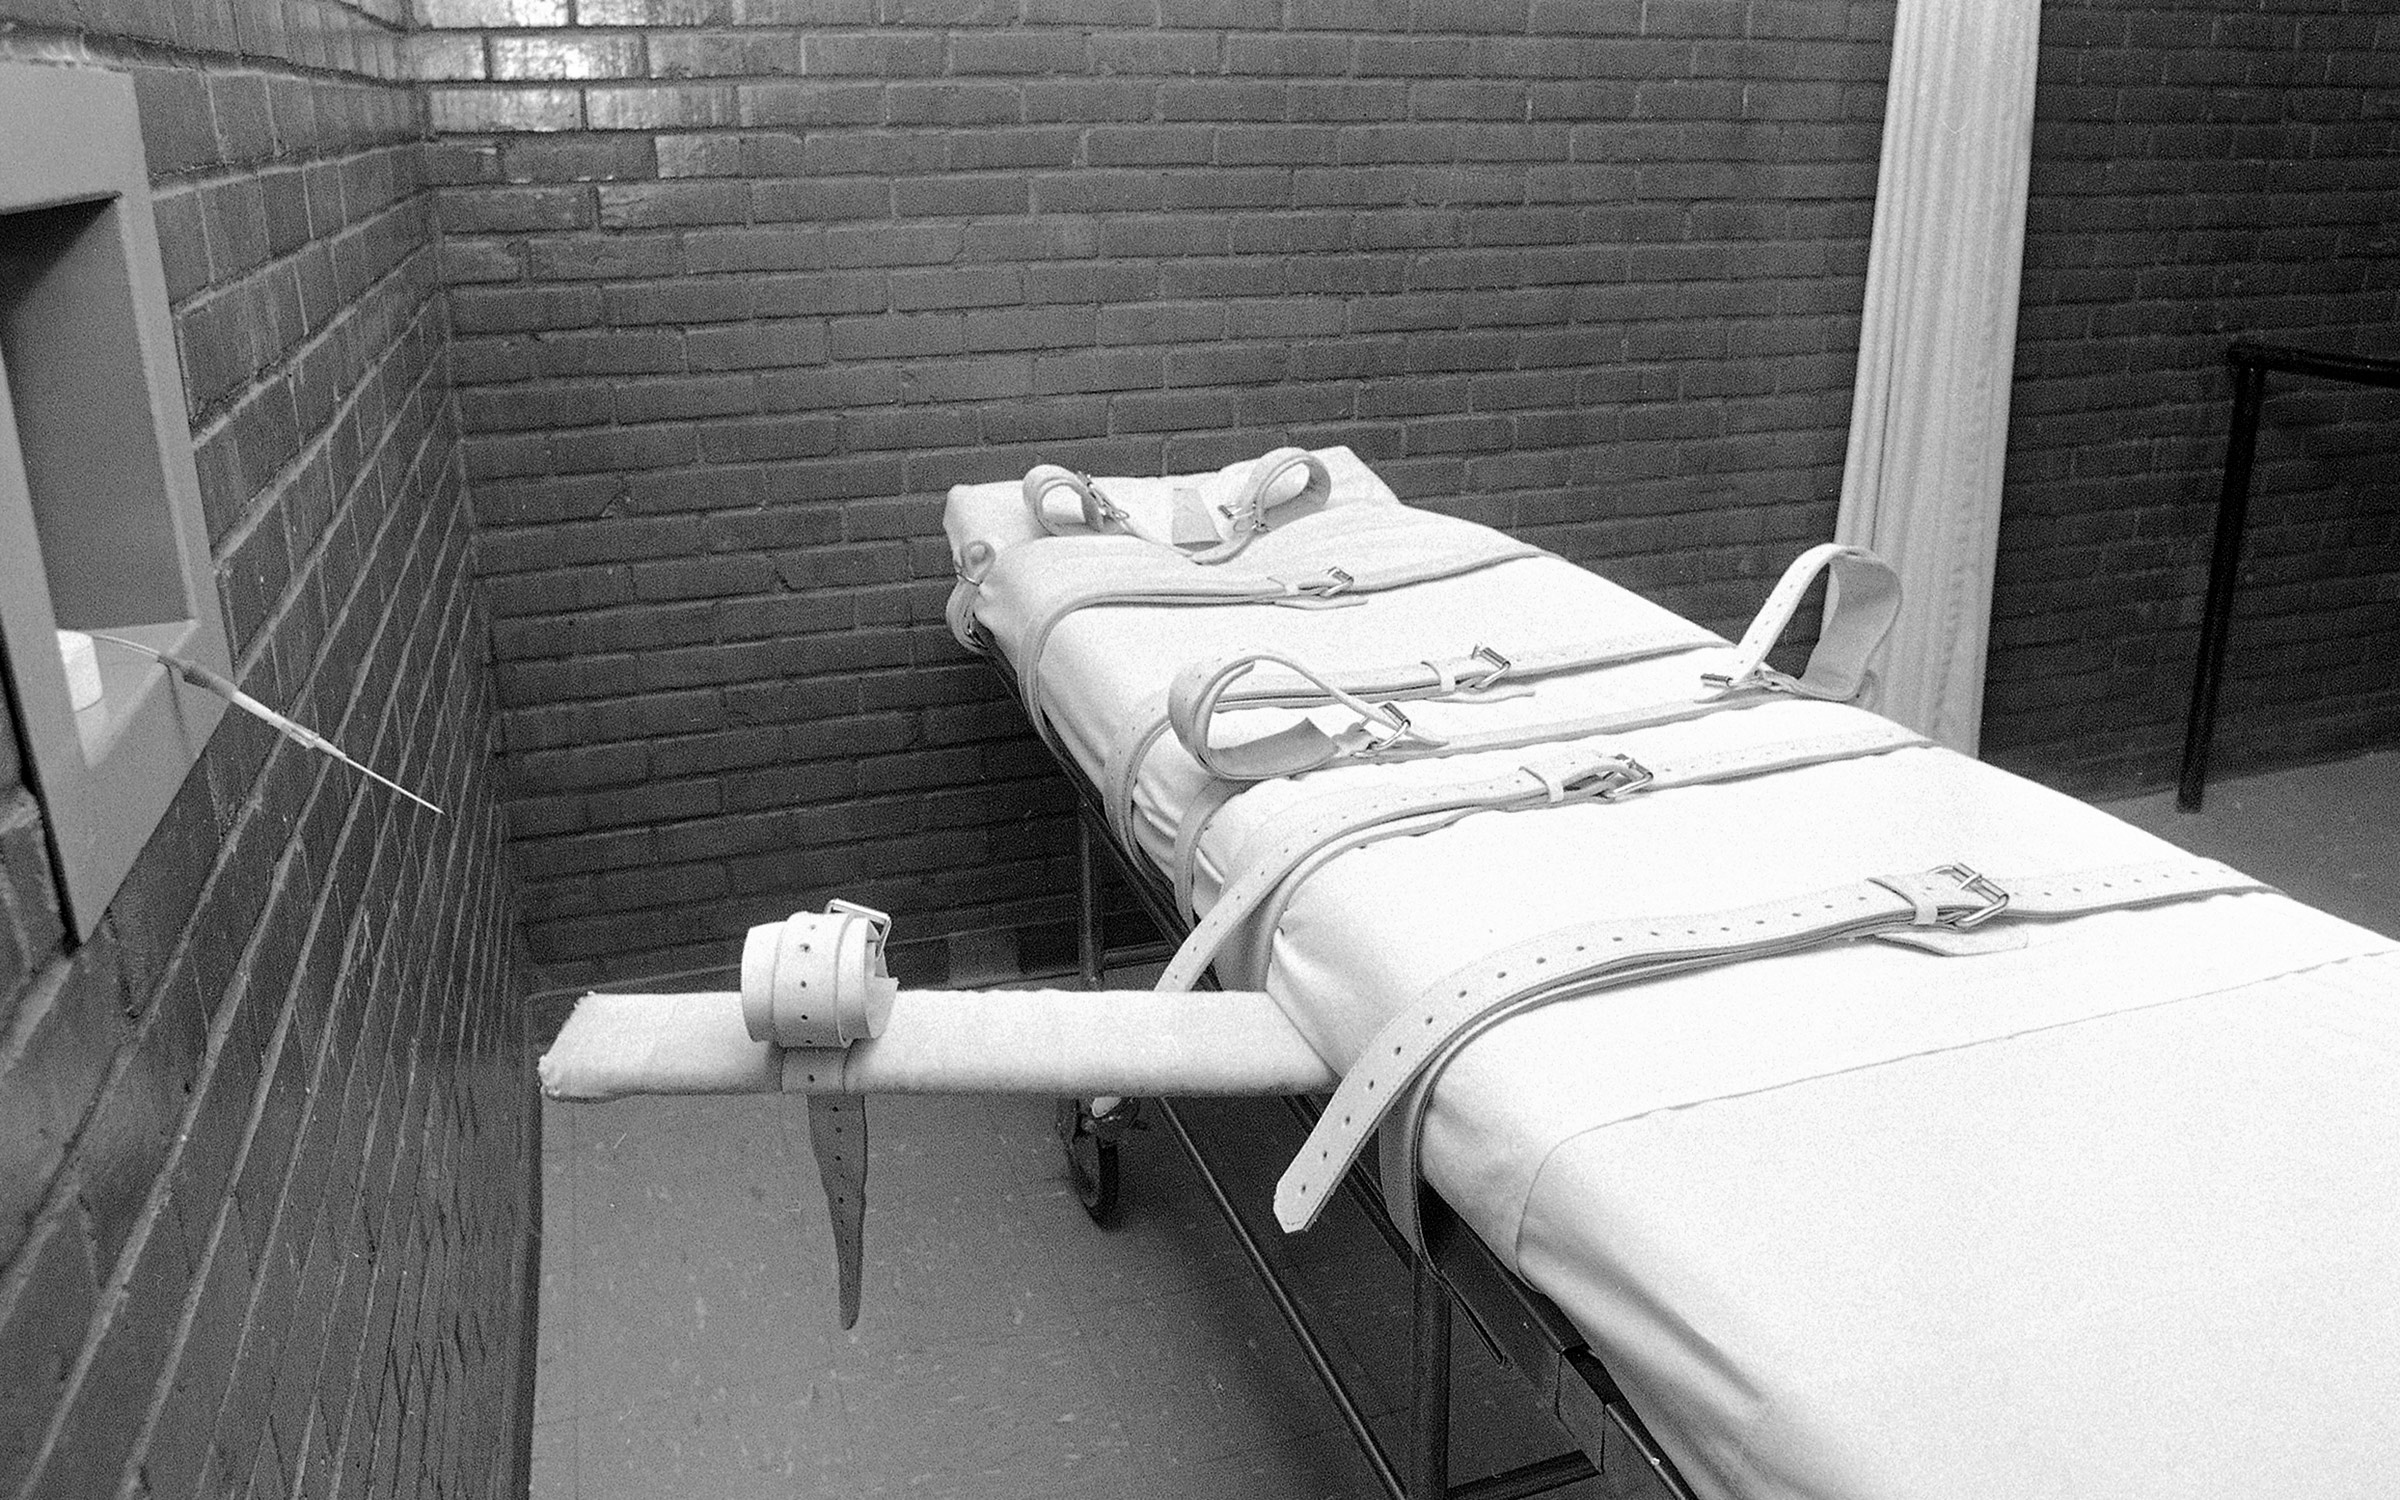 Bearing Witness at Texass First Execution by Lethal Injection